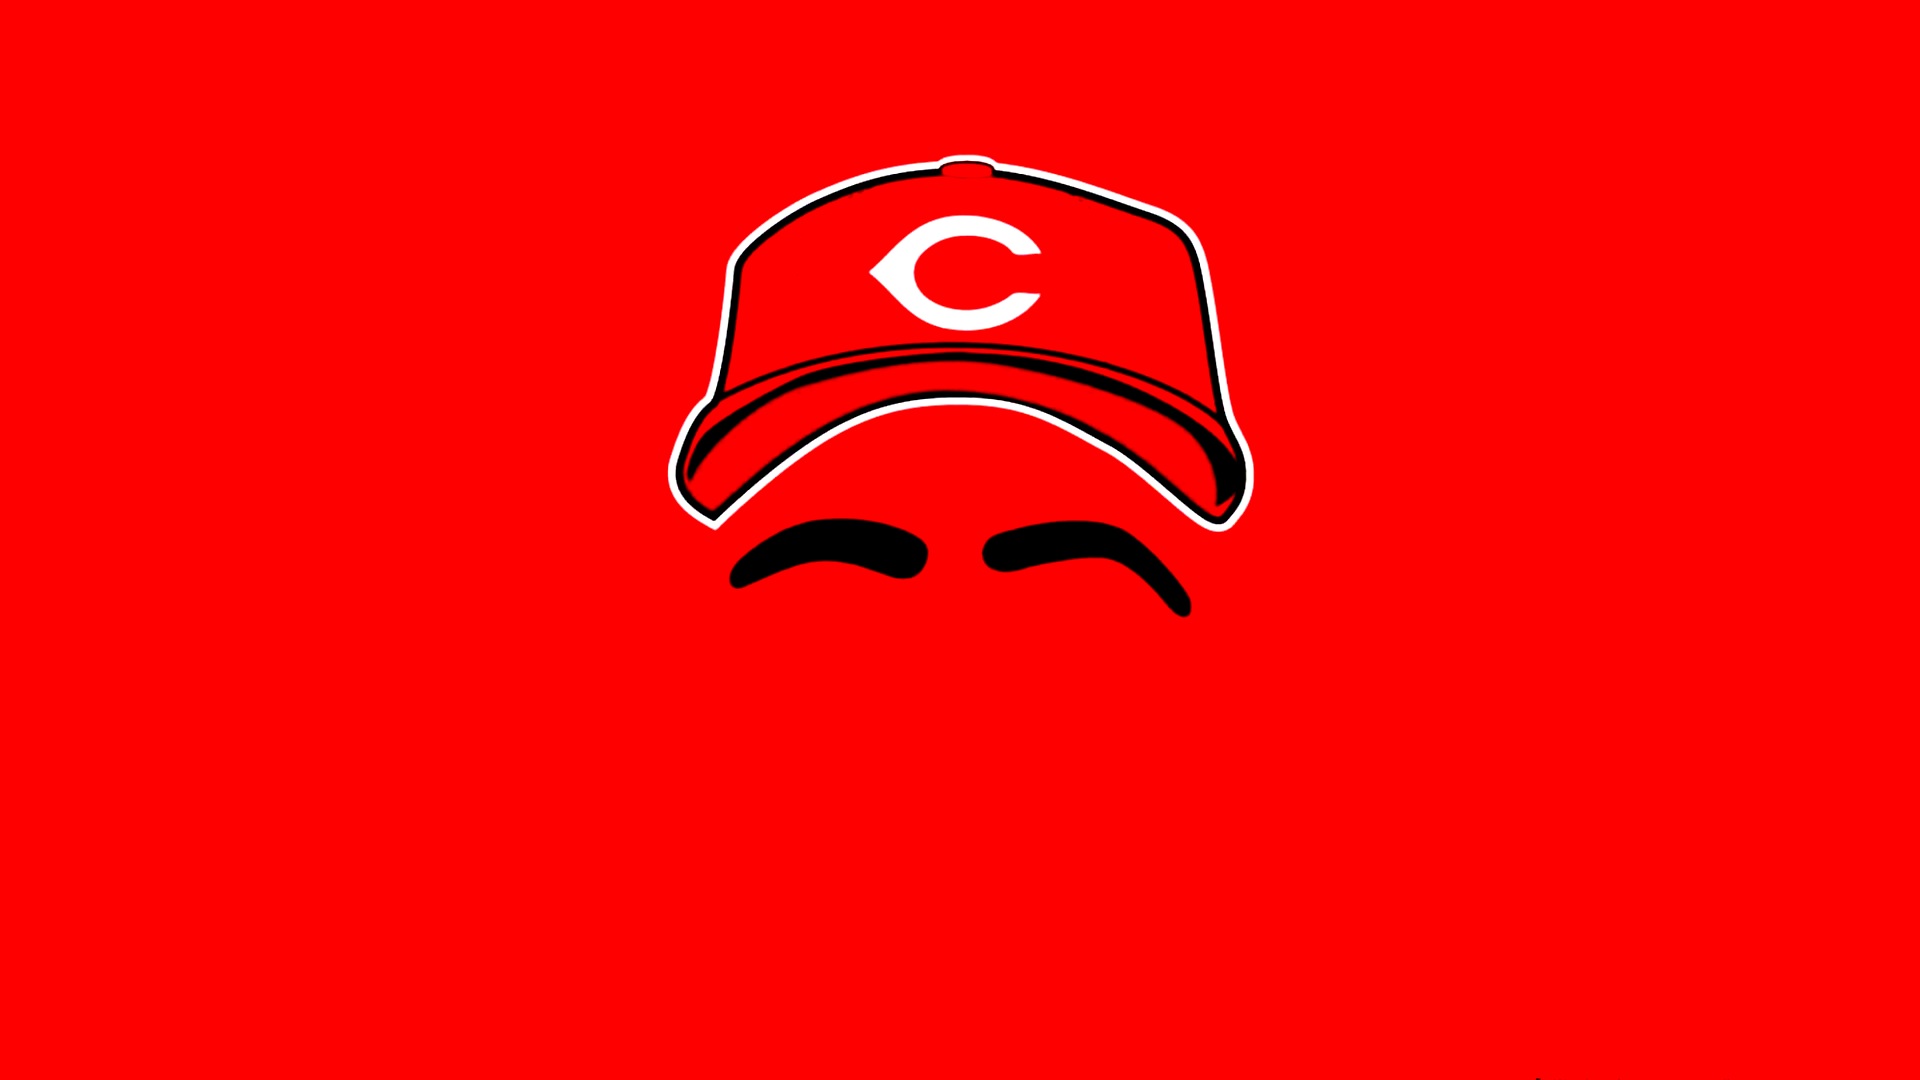 Wallpapers HD Cincinnati Reds MLB with high-resolution 1920x1080 pixel. You can use this wallpaper for Mac Desktop Wallpaper, Laptop Screensavers, Android Wallpapers, Tablet or iPhone Home Screen and another mobile phone device